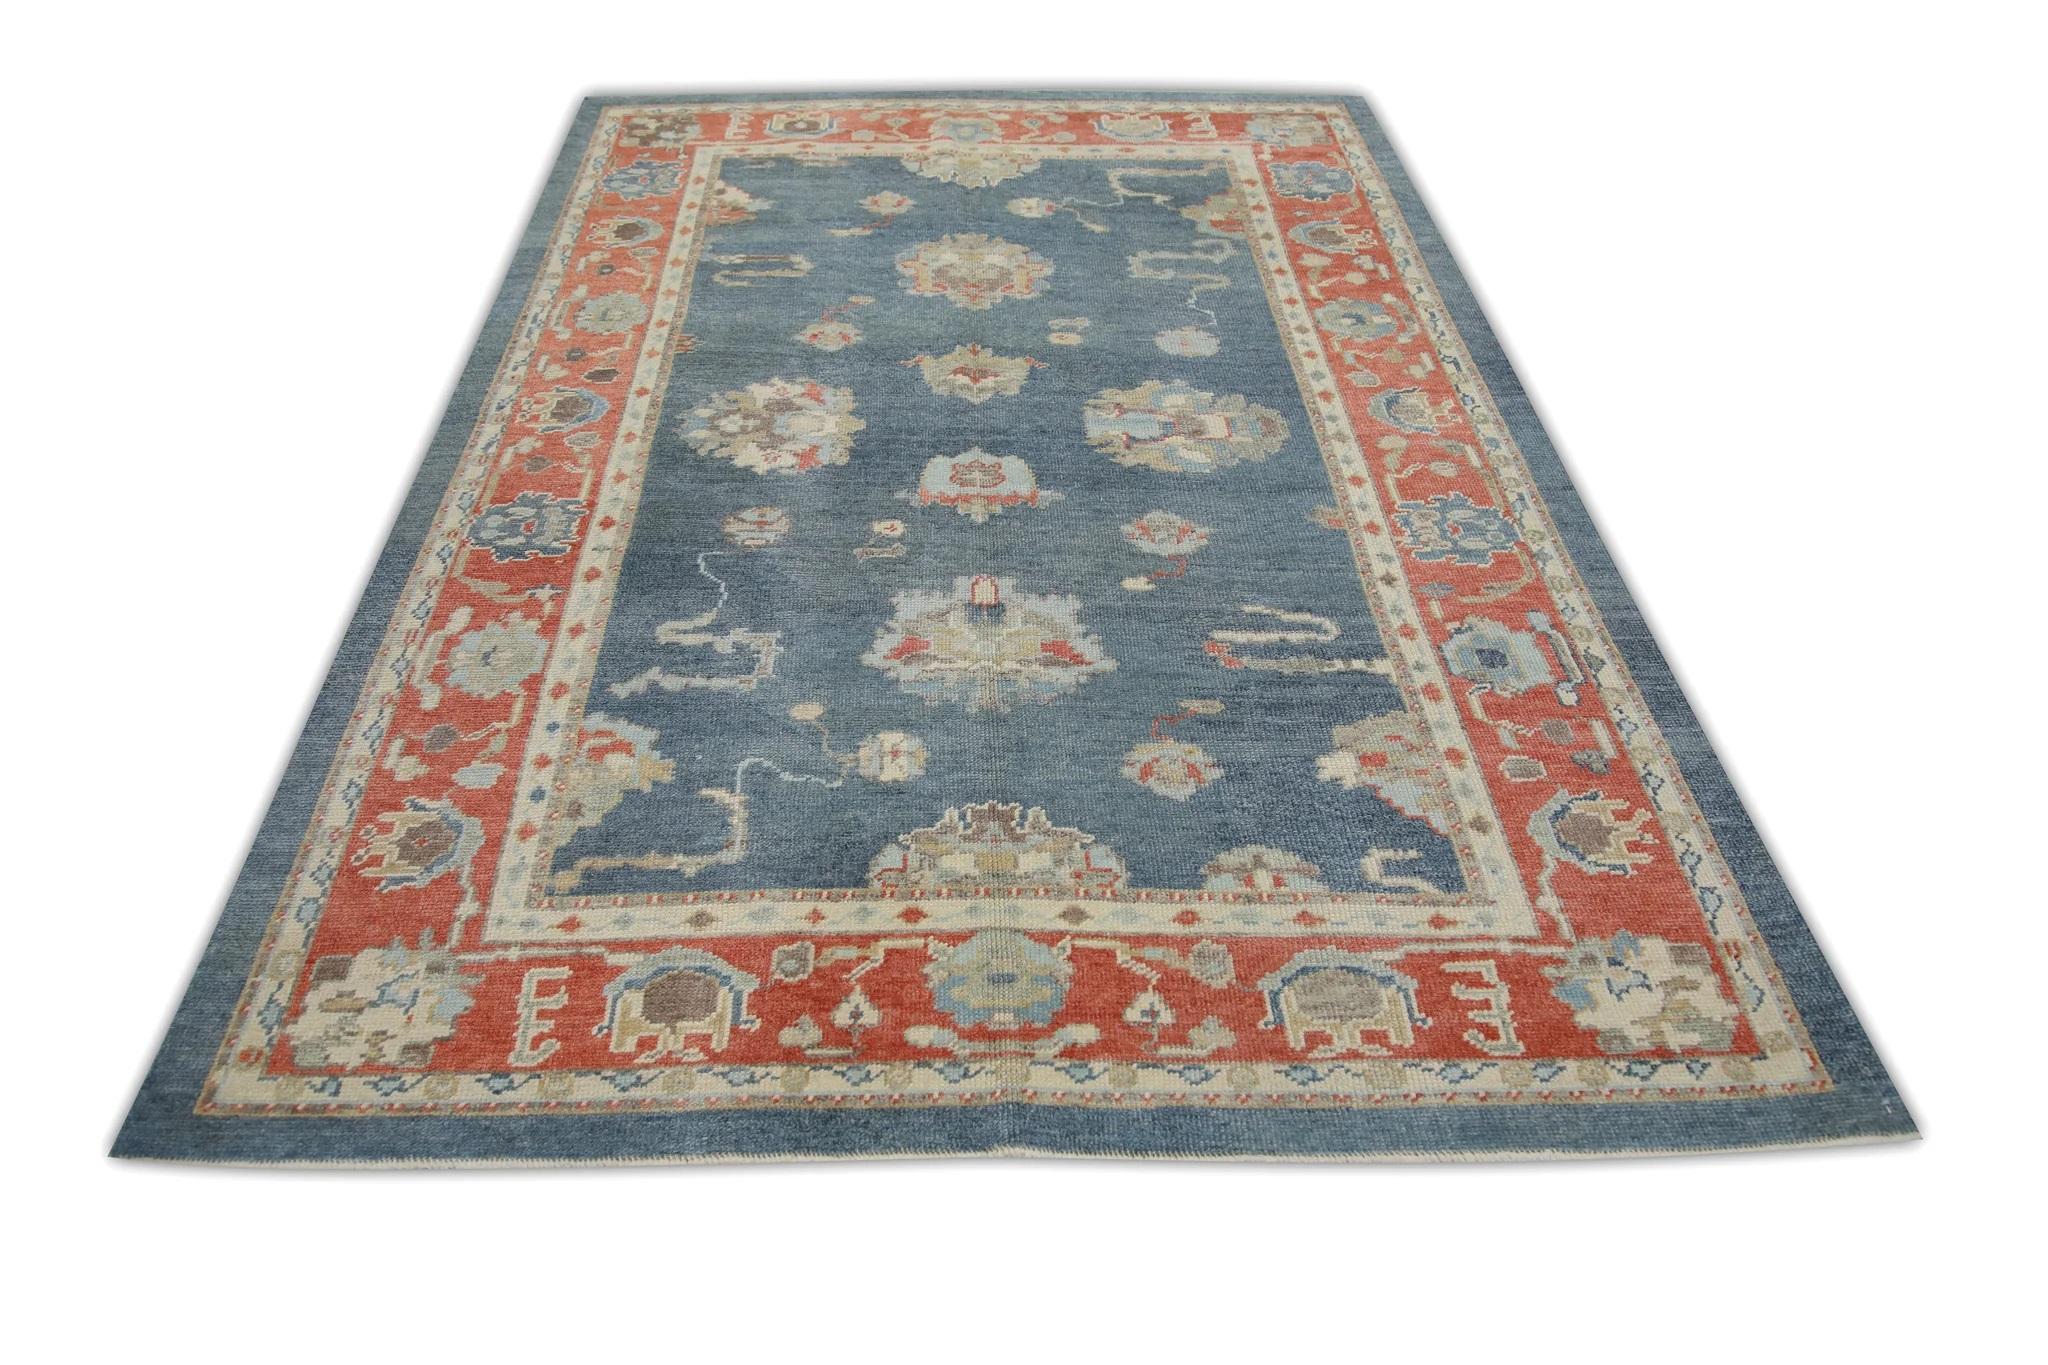 Red and Blue Floral Handwoven Wool Turkish Oushak Rug 6' x 8'6